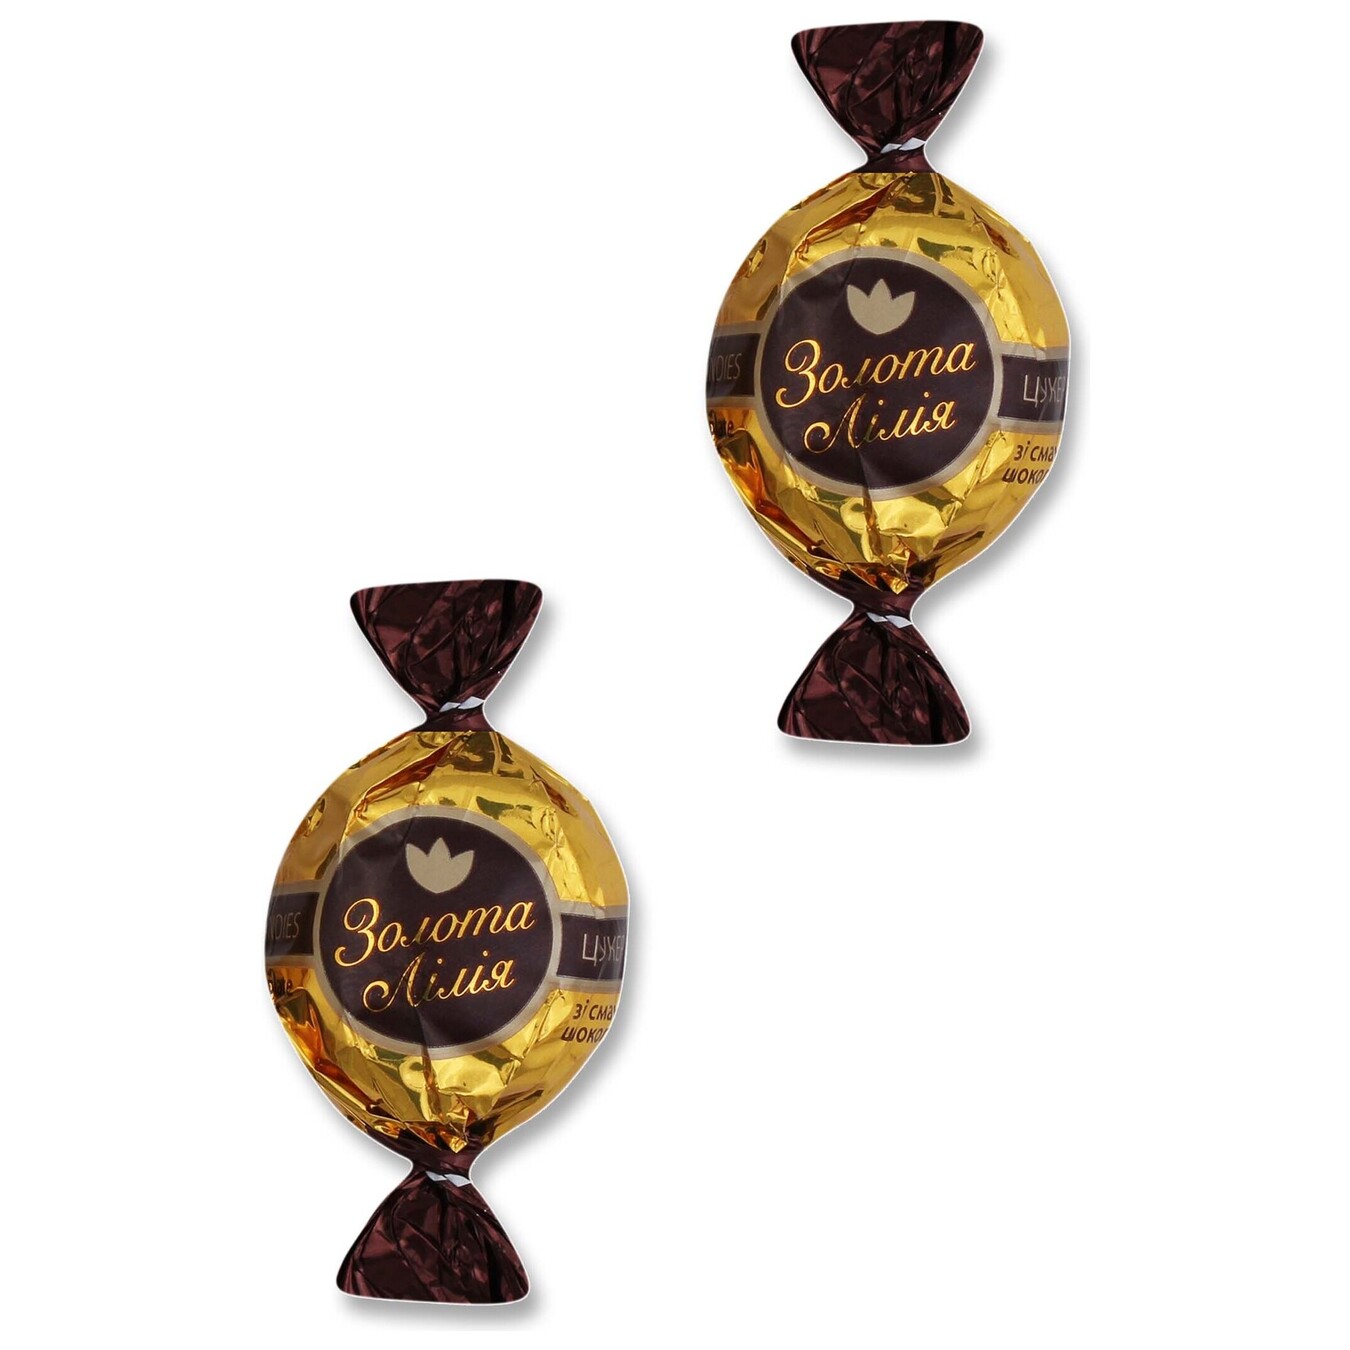 Konti Golden Lily candies with chocolate flavor